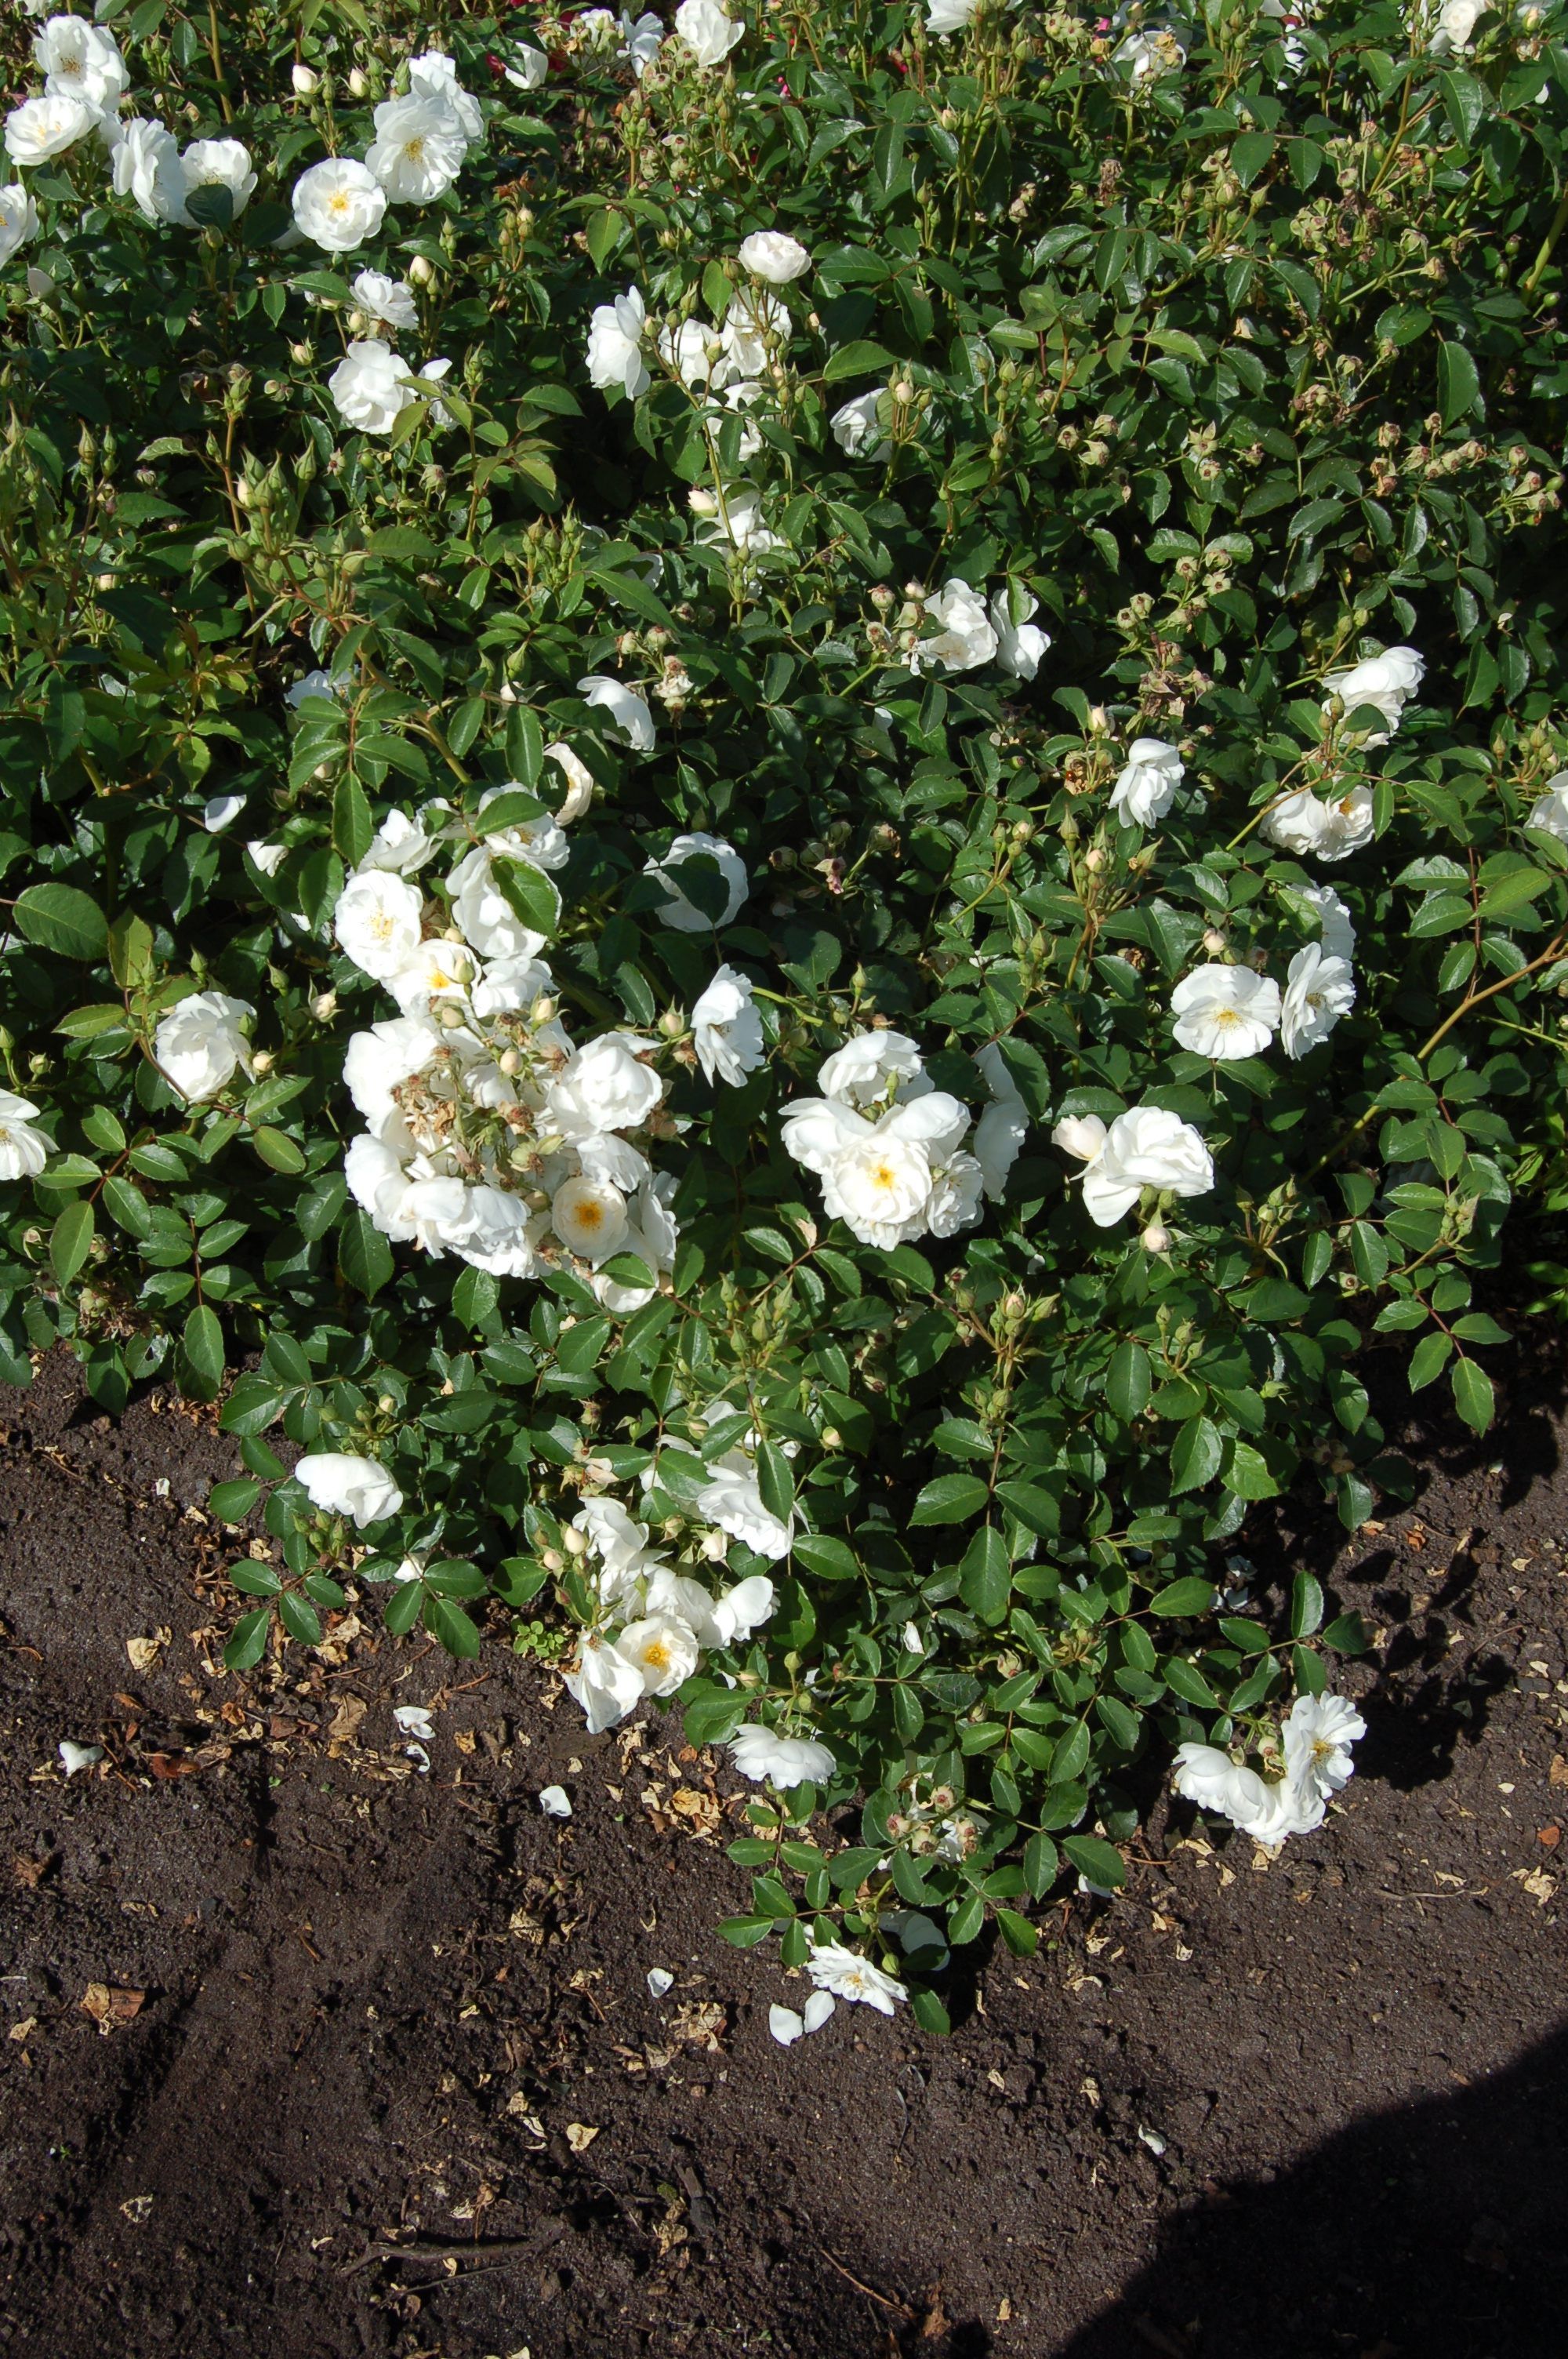 images/plants/rosa/ros-nitty-gritty-white/ros-nitty-gritty-white-0007.jpg